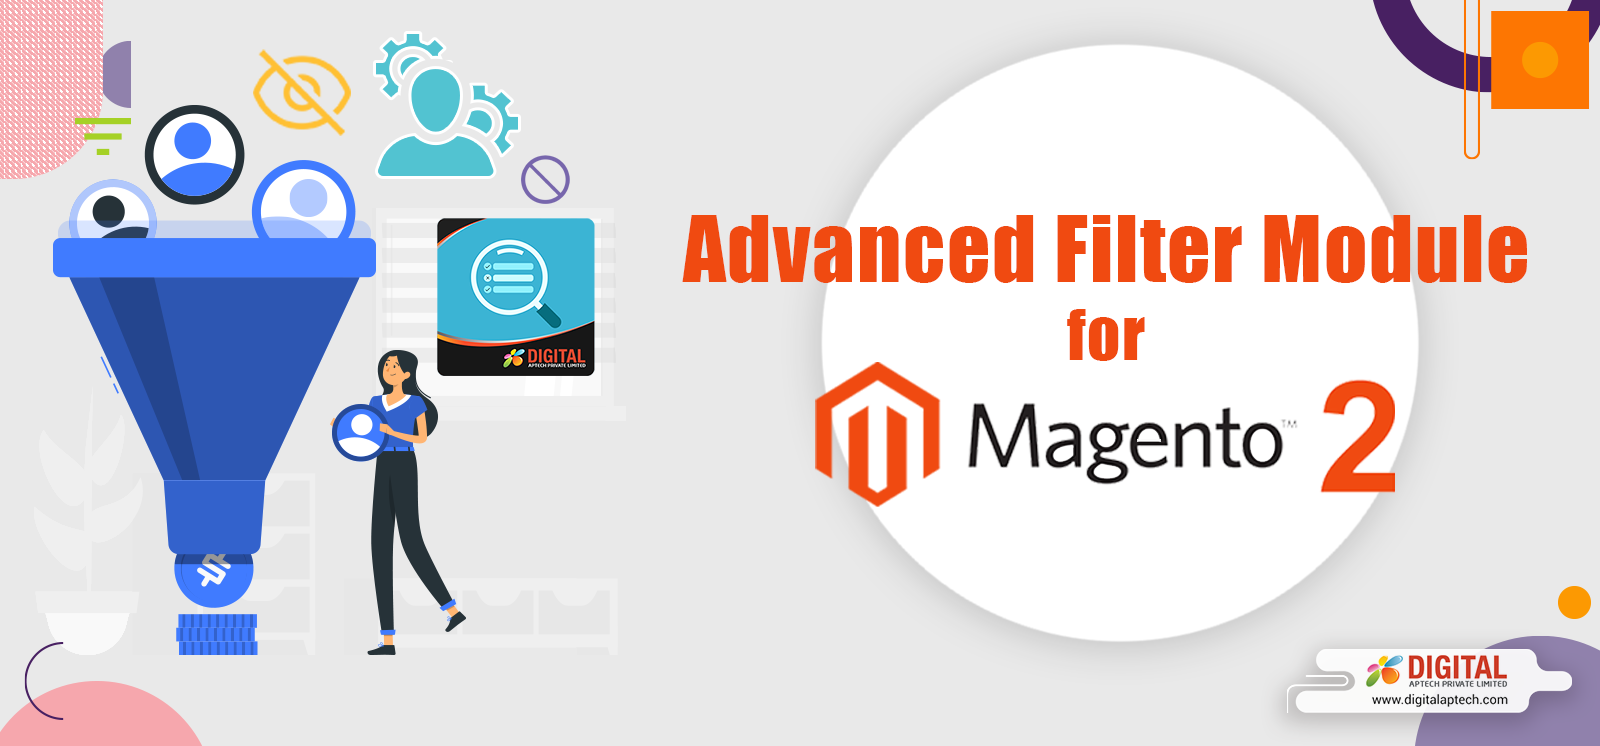 Advanced Filter Module for Magento 2